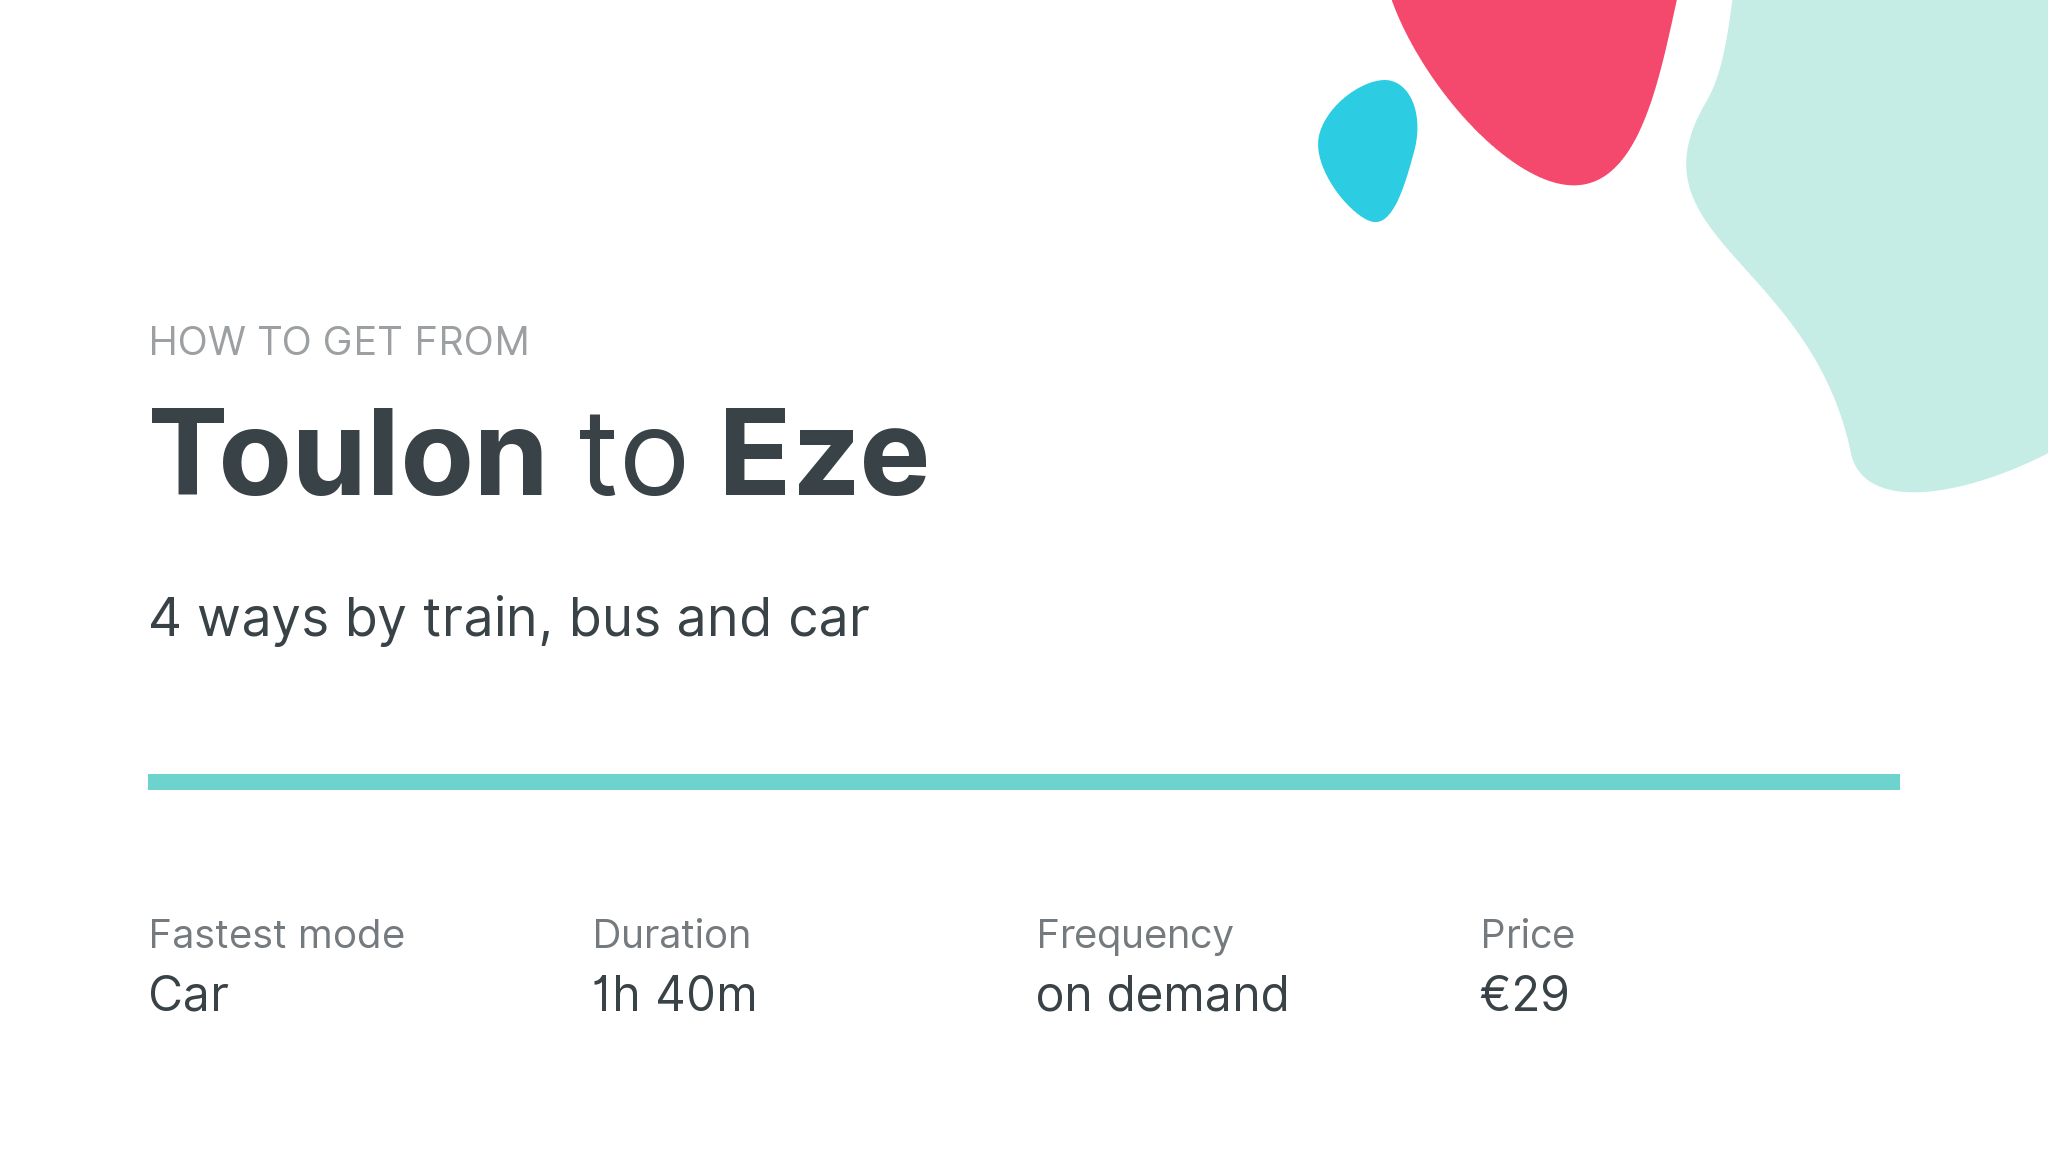 How do I get from Toulon to Eze